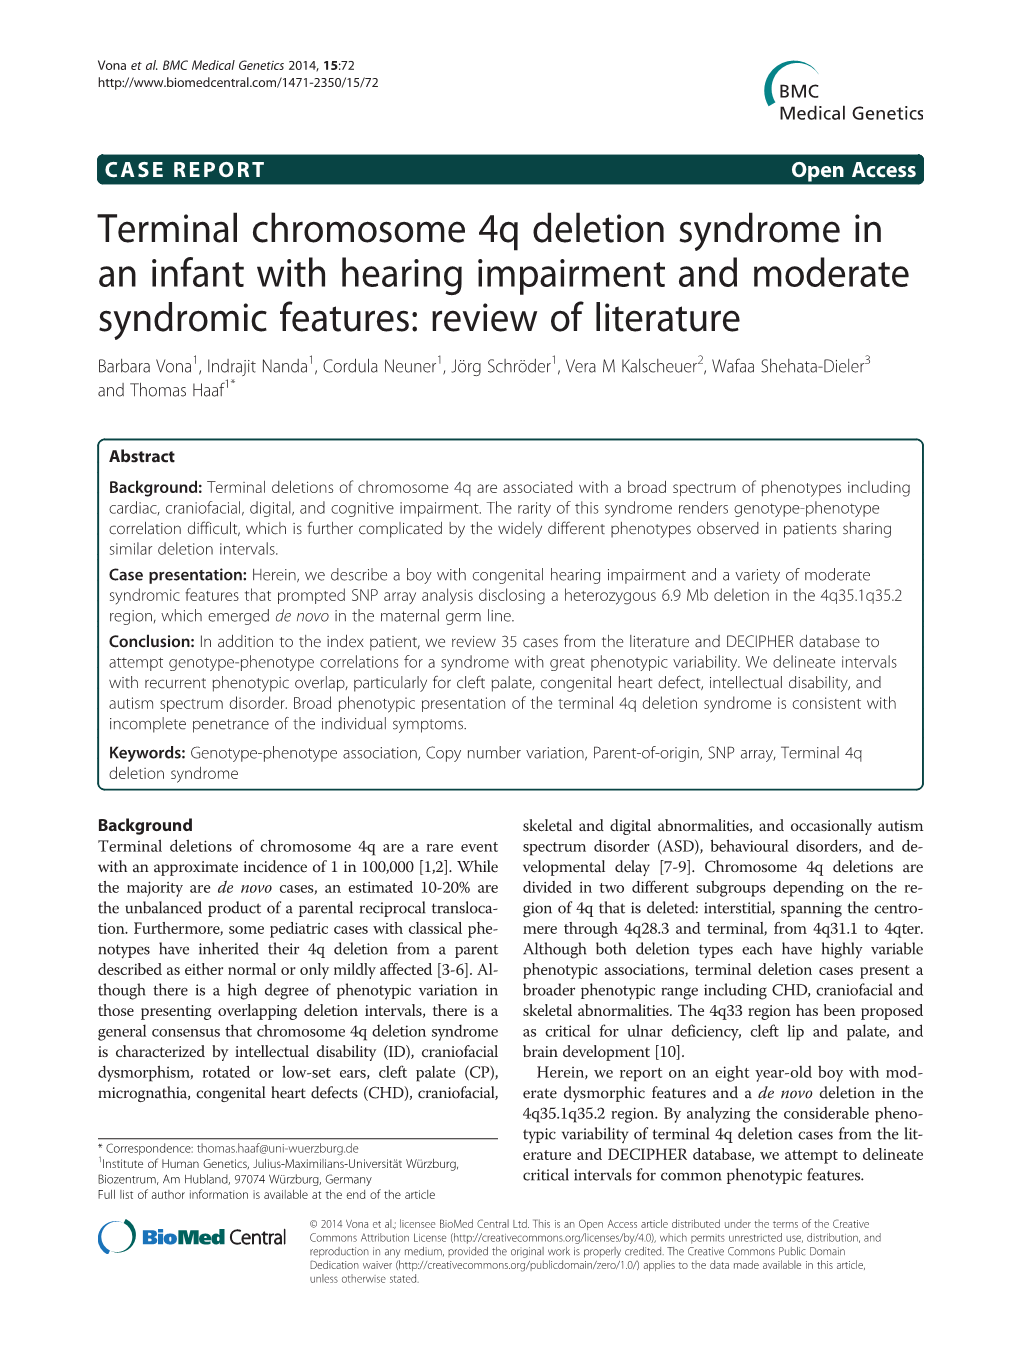 Terminal Chromosome 4Q Deletion Syndrome in an Infant with Hearing